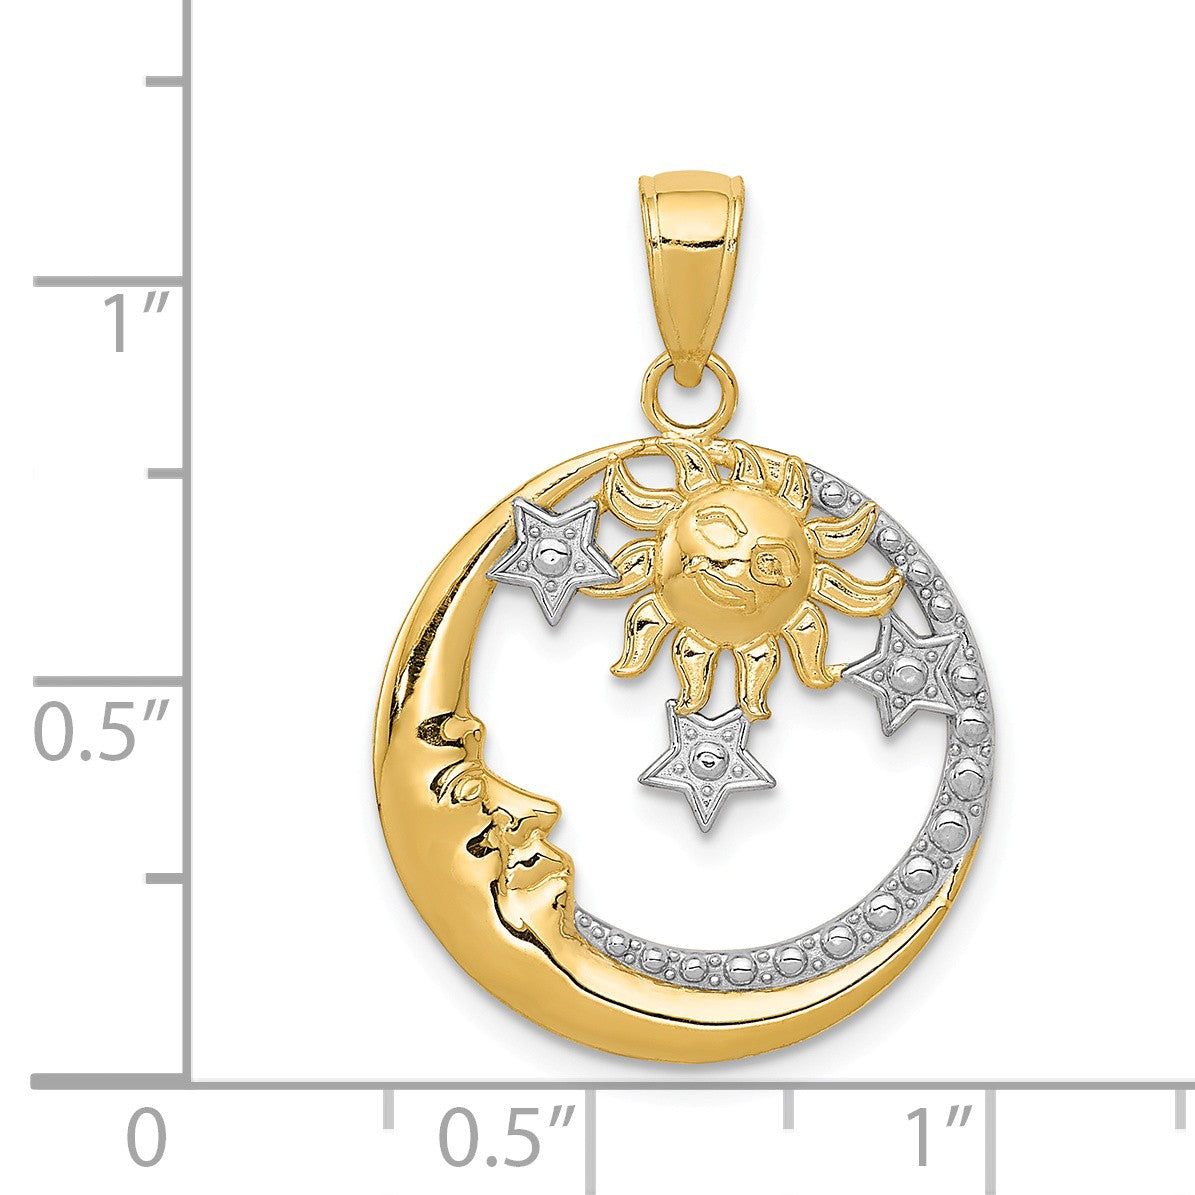 Alternate view of the 14k Yellow Gold &amp; White Rhodium Round Celestial Pendant, 20mm (3/4 in) by The Black Bow Jewelry Co.